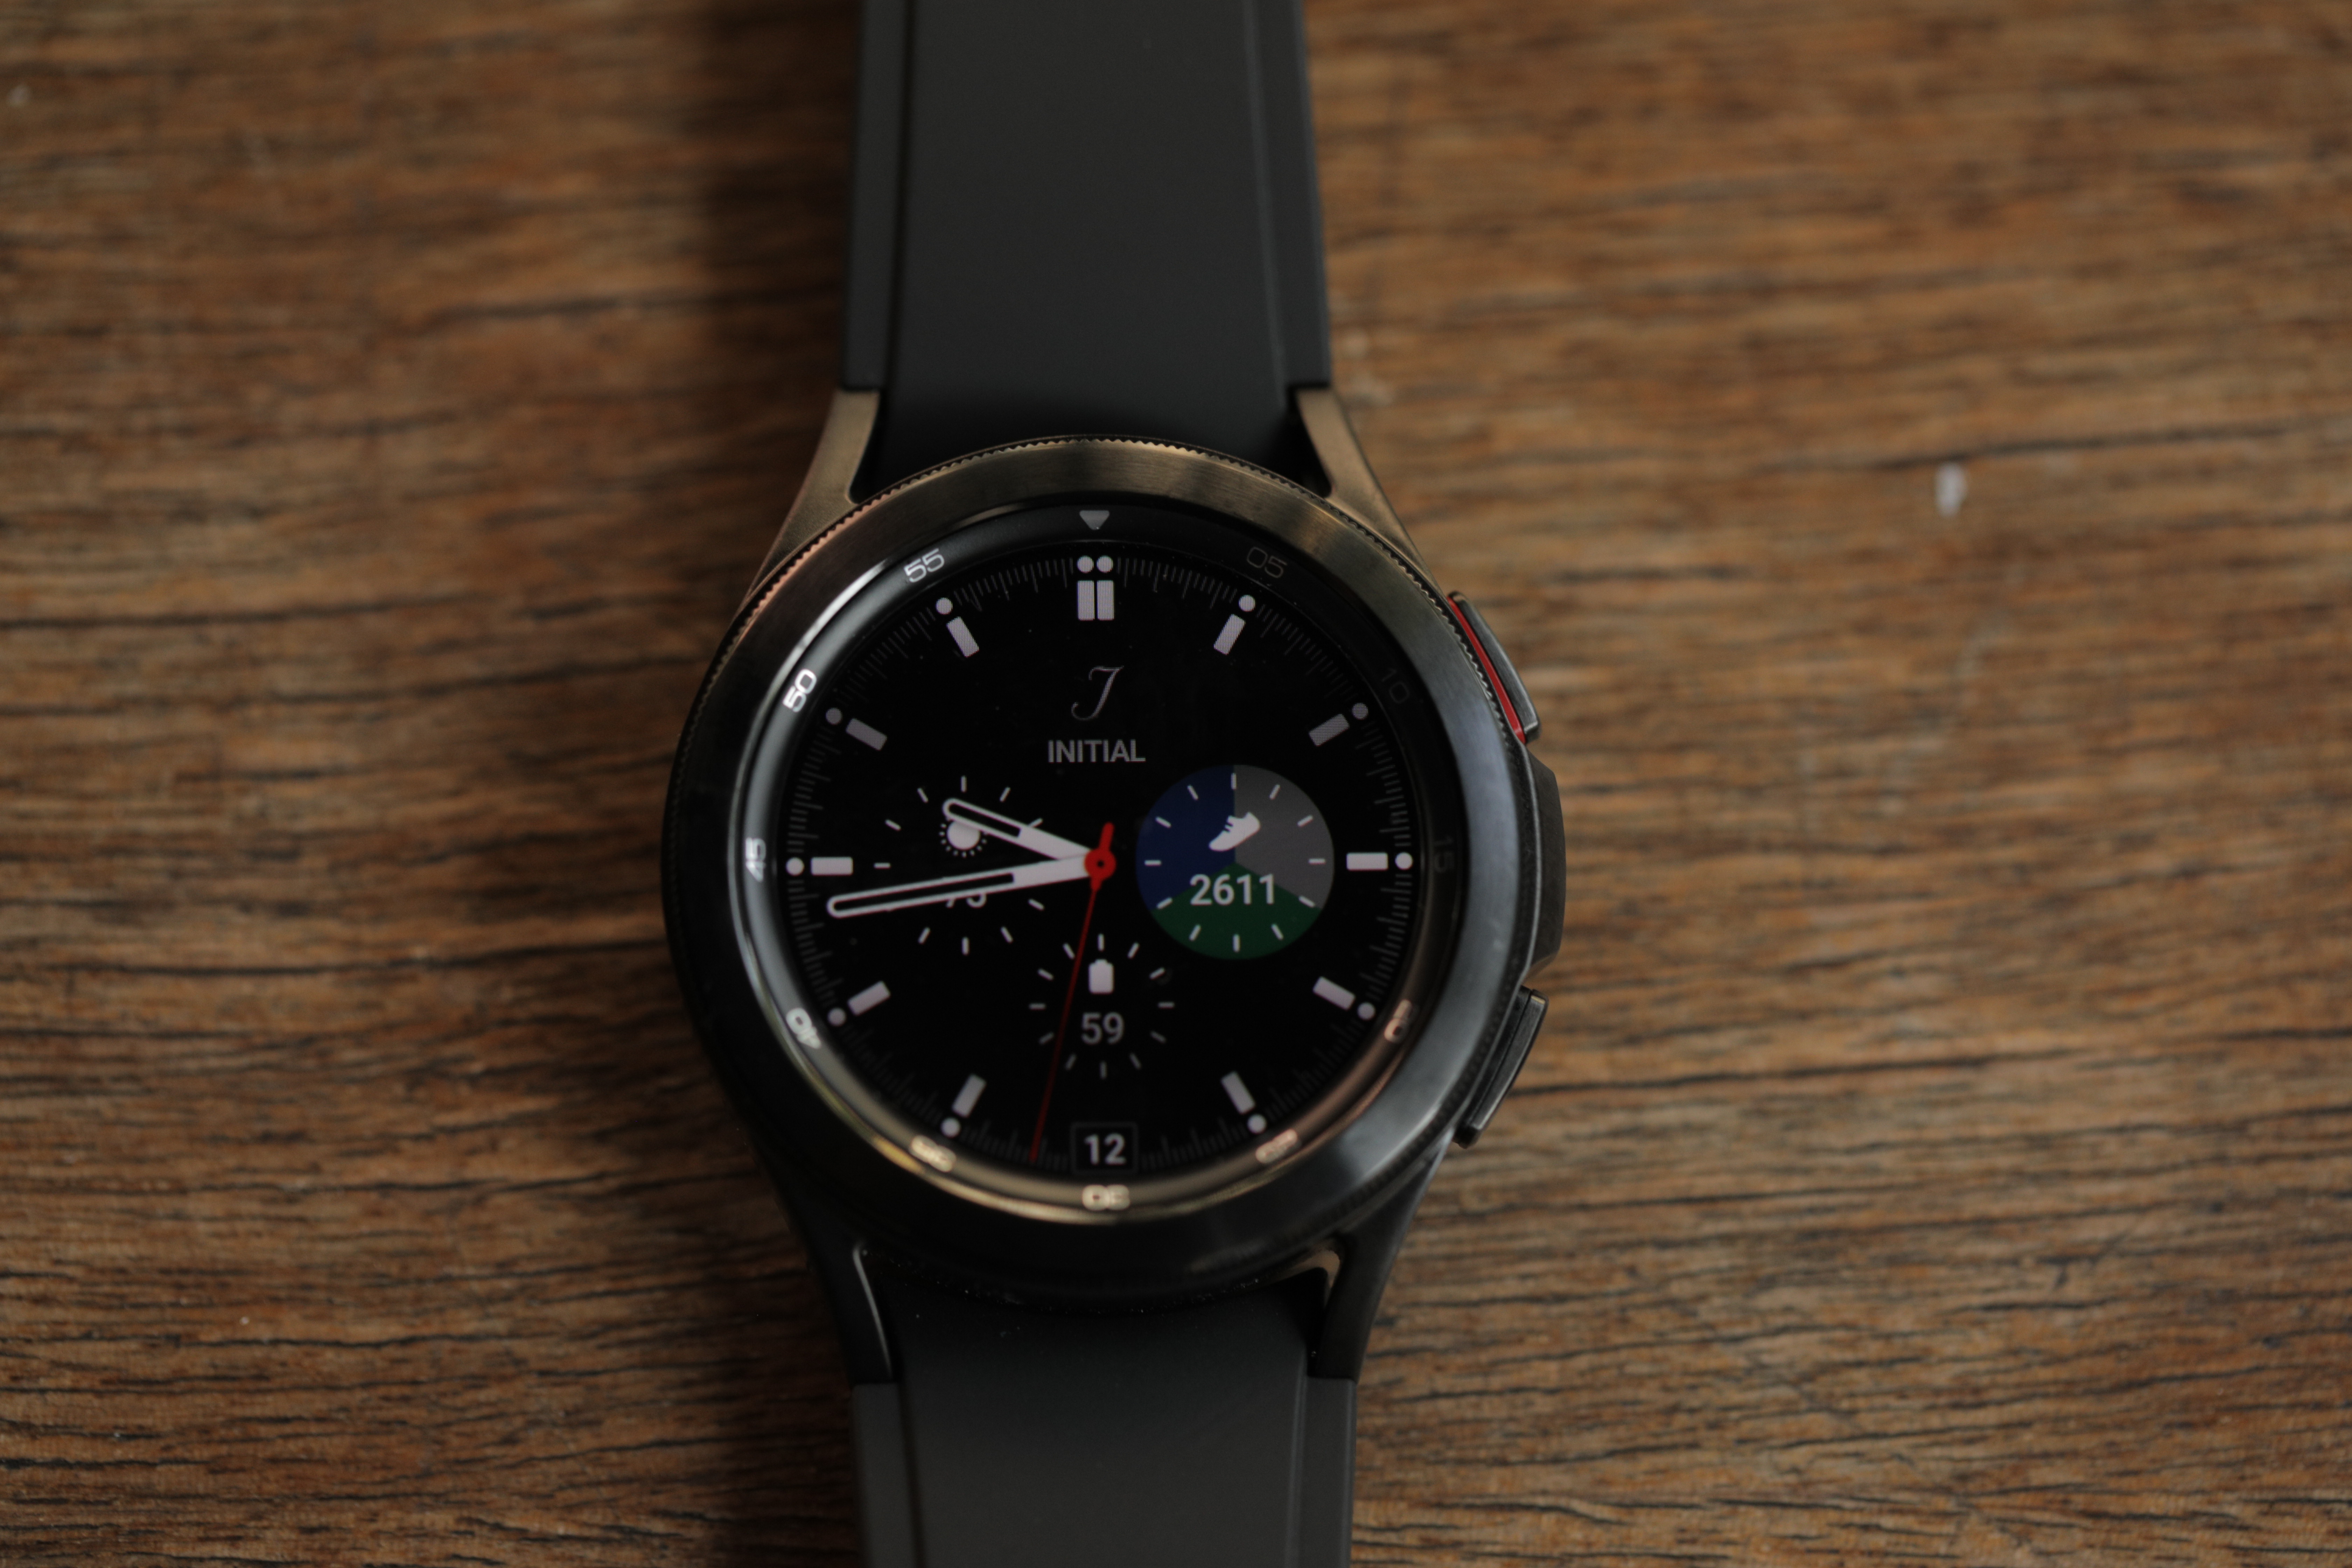 Samsung Galaxy Watch 4 Classic: A well-rounded smartwatch | TechCrunch